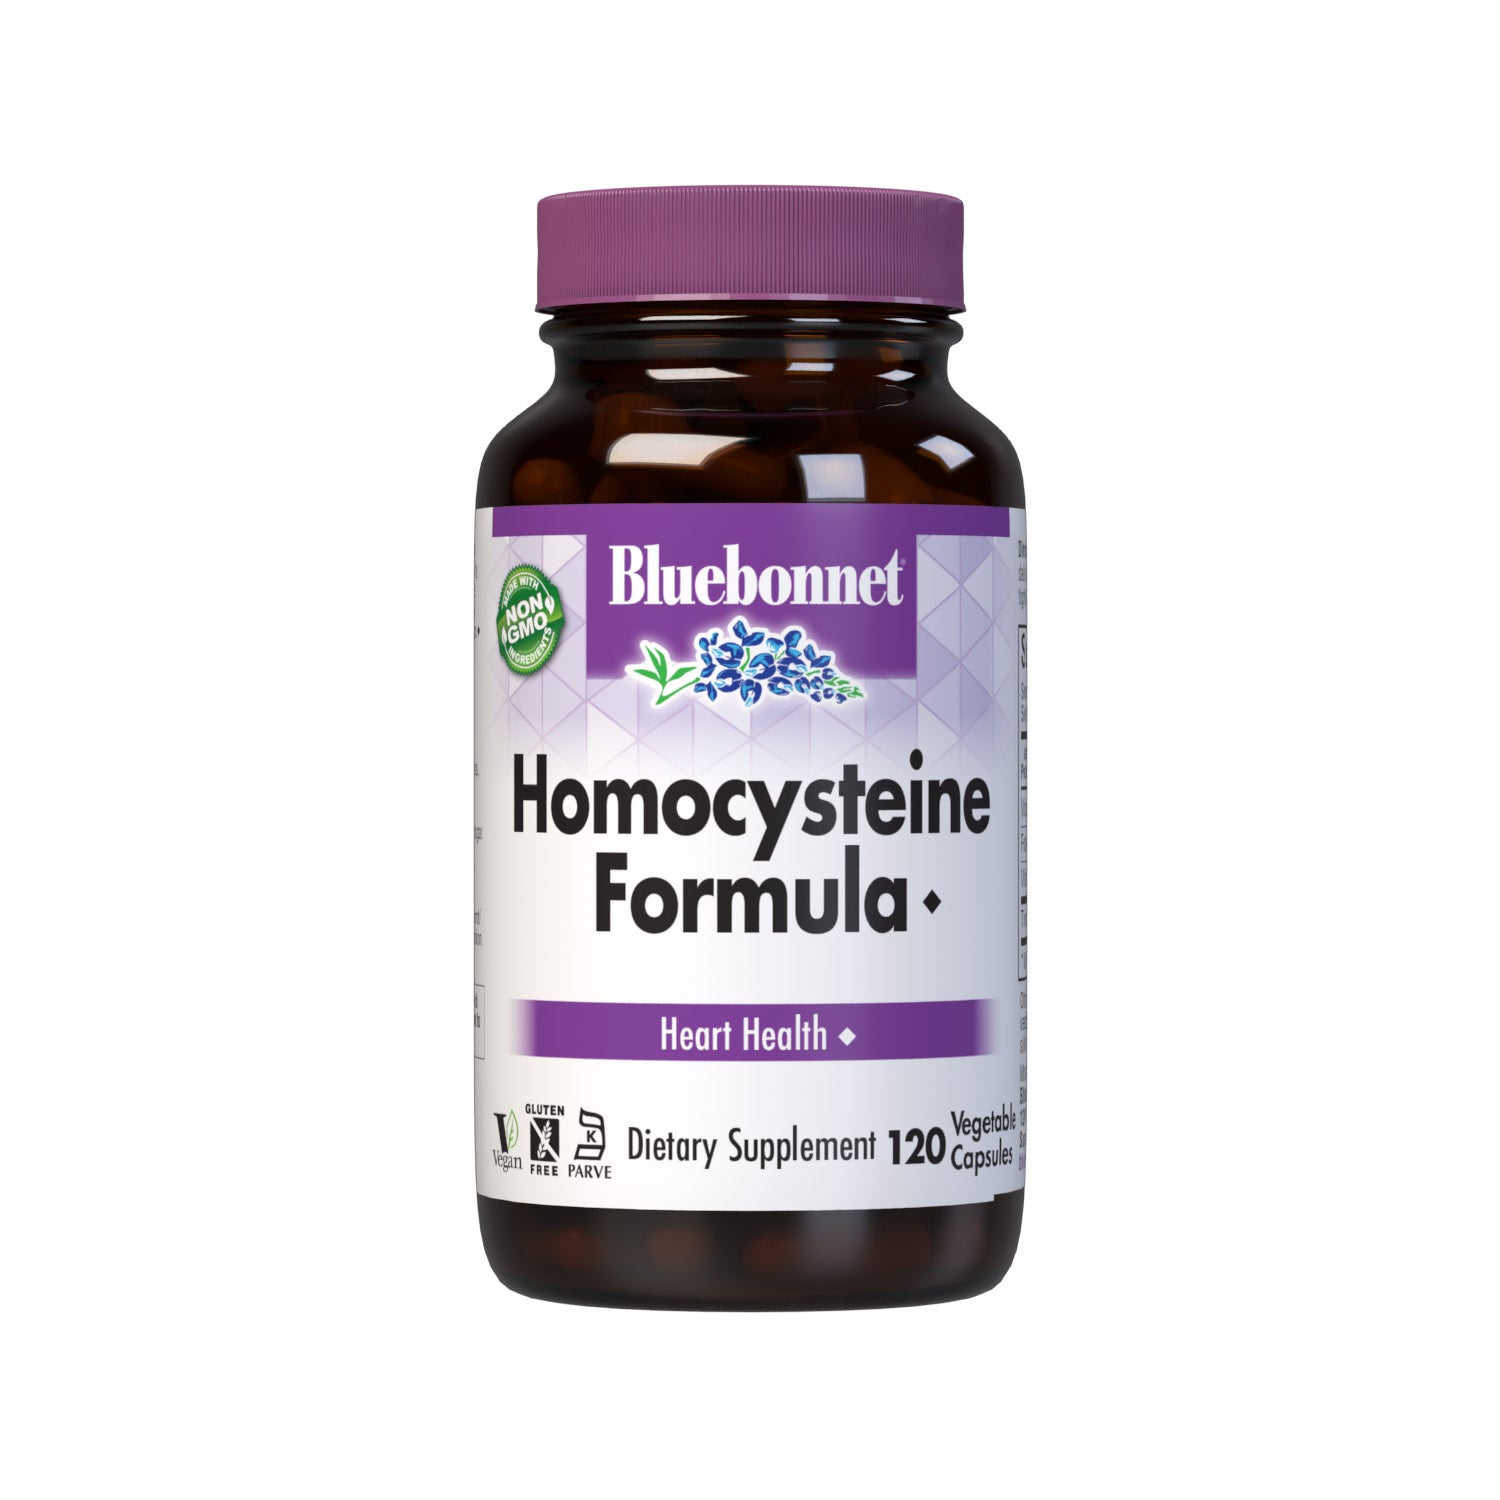 Bluebonnet’s Homocysteine Formula 120 Vegetable Capsules are formulated with vitamin B6, vitamin B12 and folic acid, along with trimethylglycine derived from non-GMO beets to support heart health and homocysteine levels already within the normal range. #size_120 count